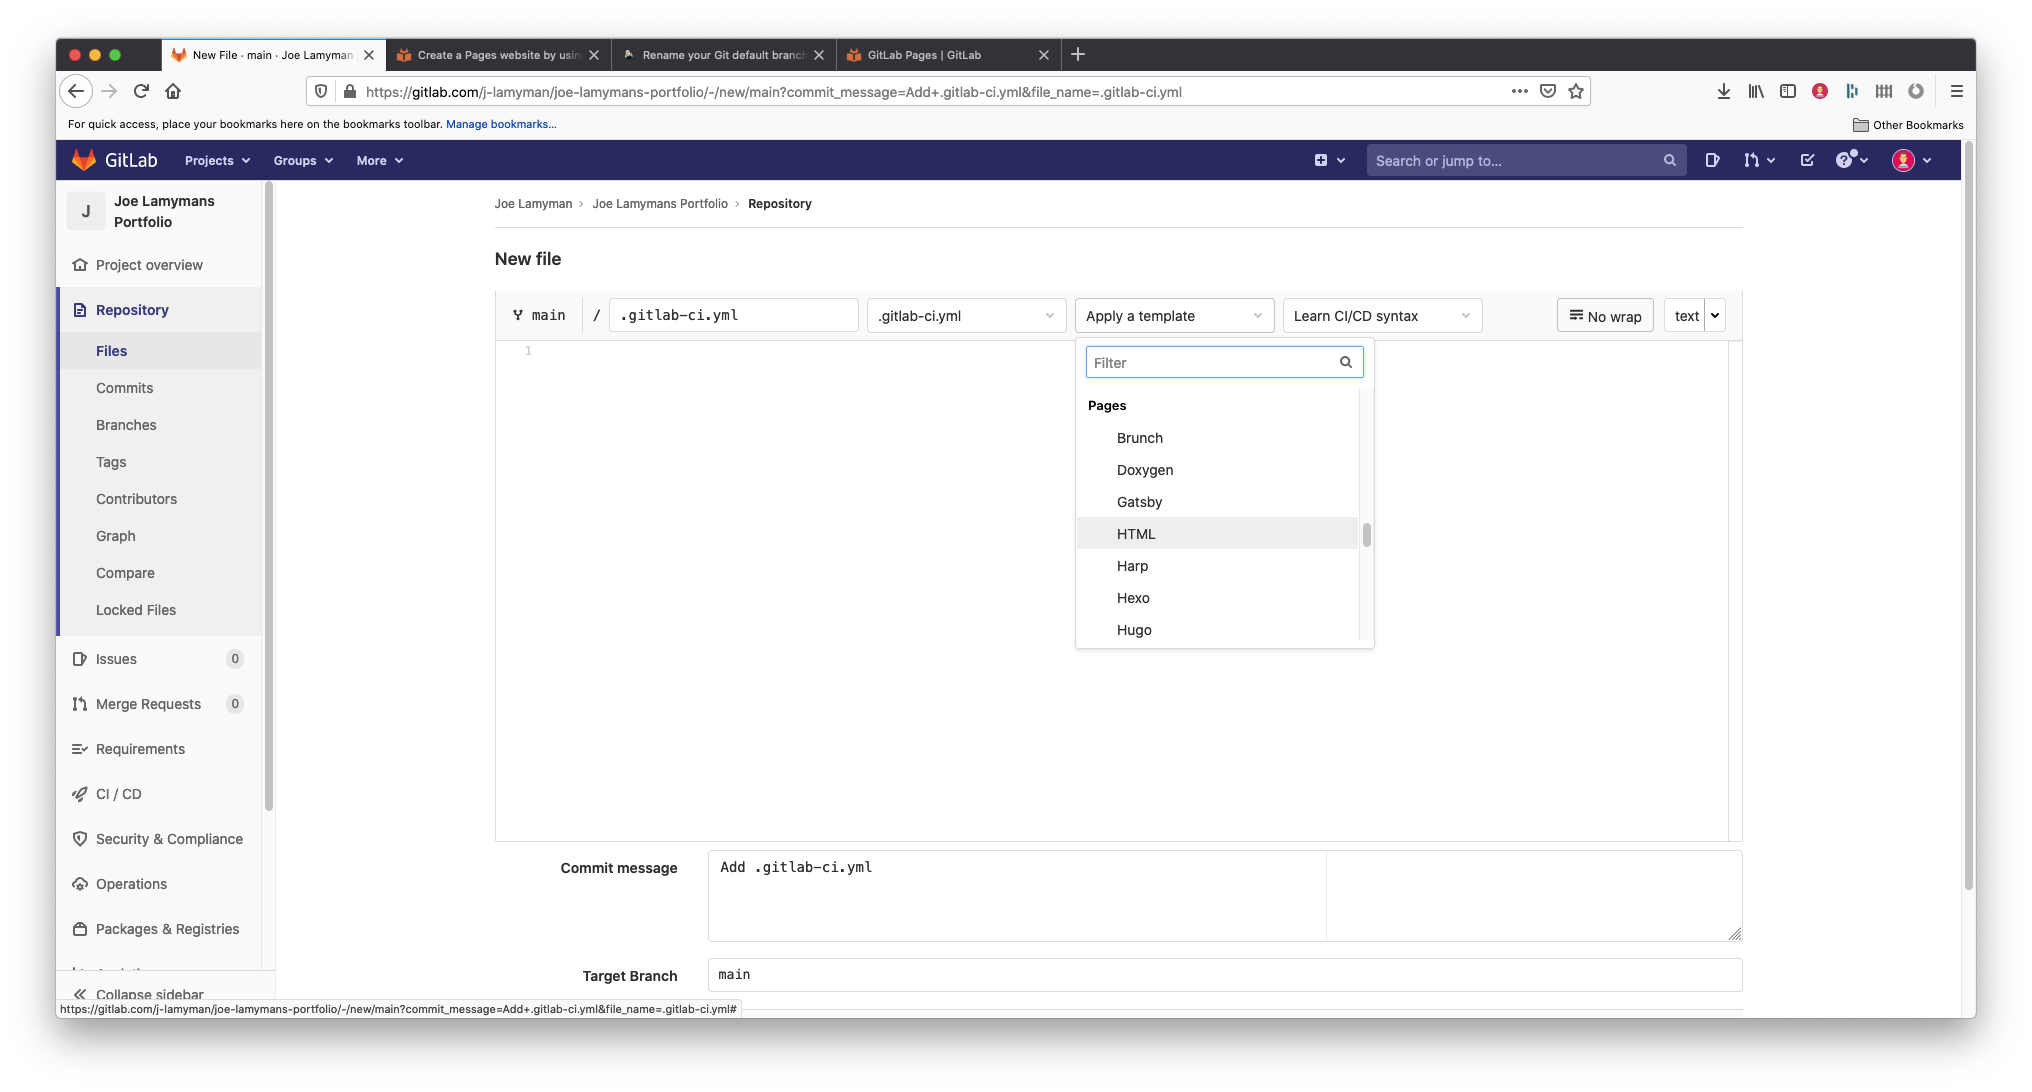 A screenshot of the Gitlab's 'New file' screen. The screen contains a series of dropdowns along the top for changing the branch, file type as well as providing the user an option to Apply a template. In this screenshot, I am on the main branch, the file is named .gitlab-ci.yml. This name was automatically generated. I have selected the 'Apply as template' button and am hovering over the option 'HTML' under the Pages subheading in the resulting dropwdown.